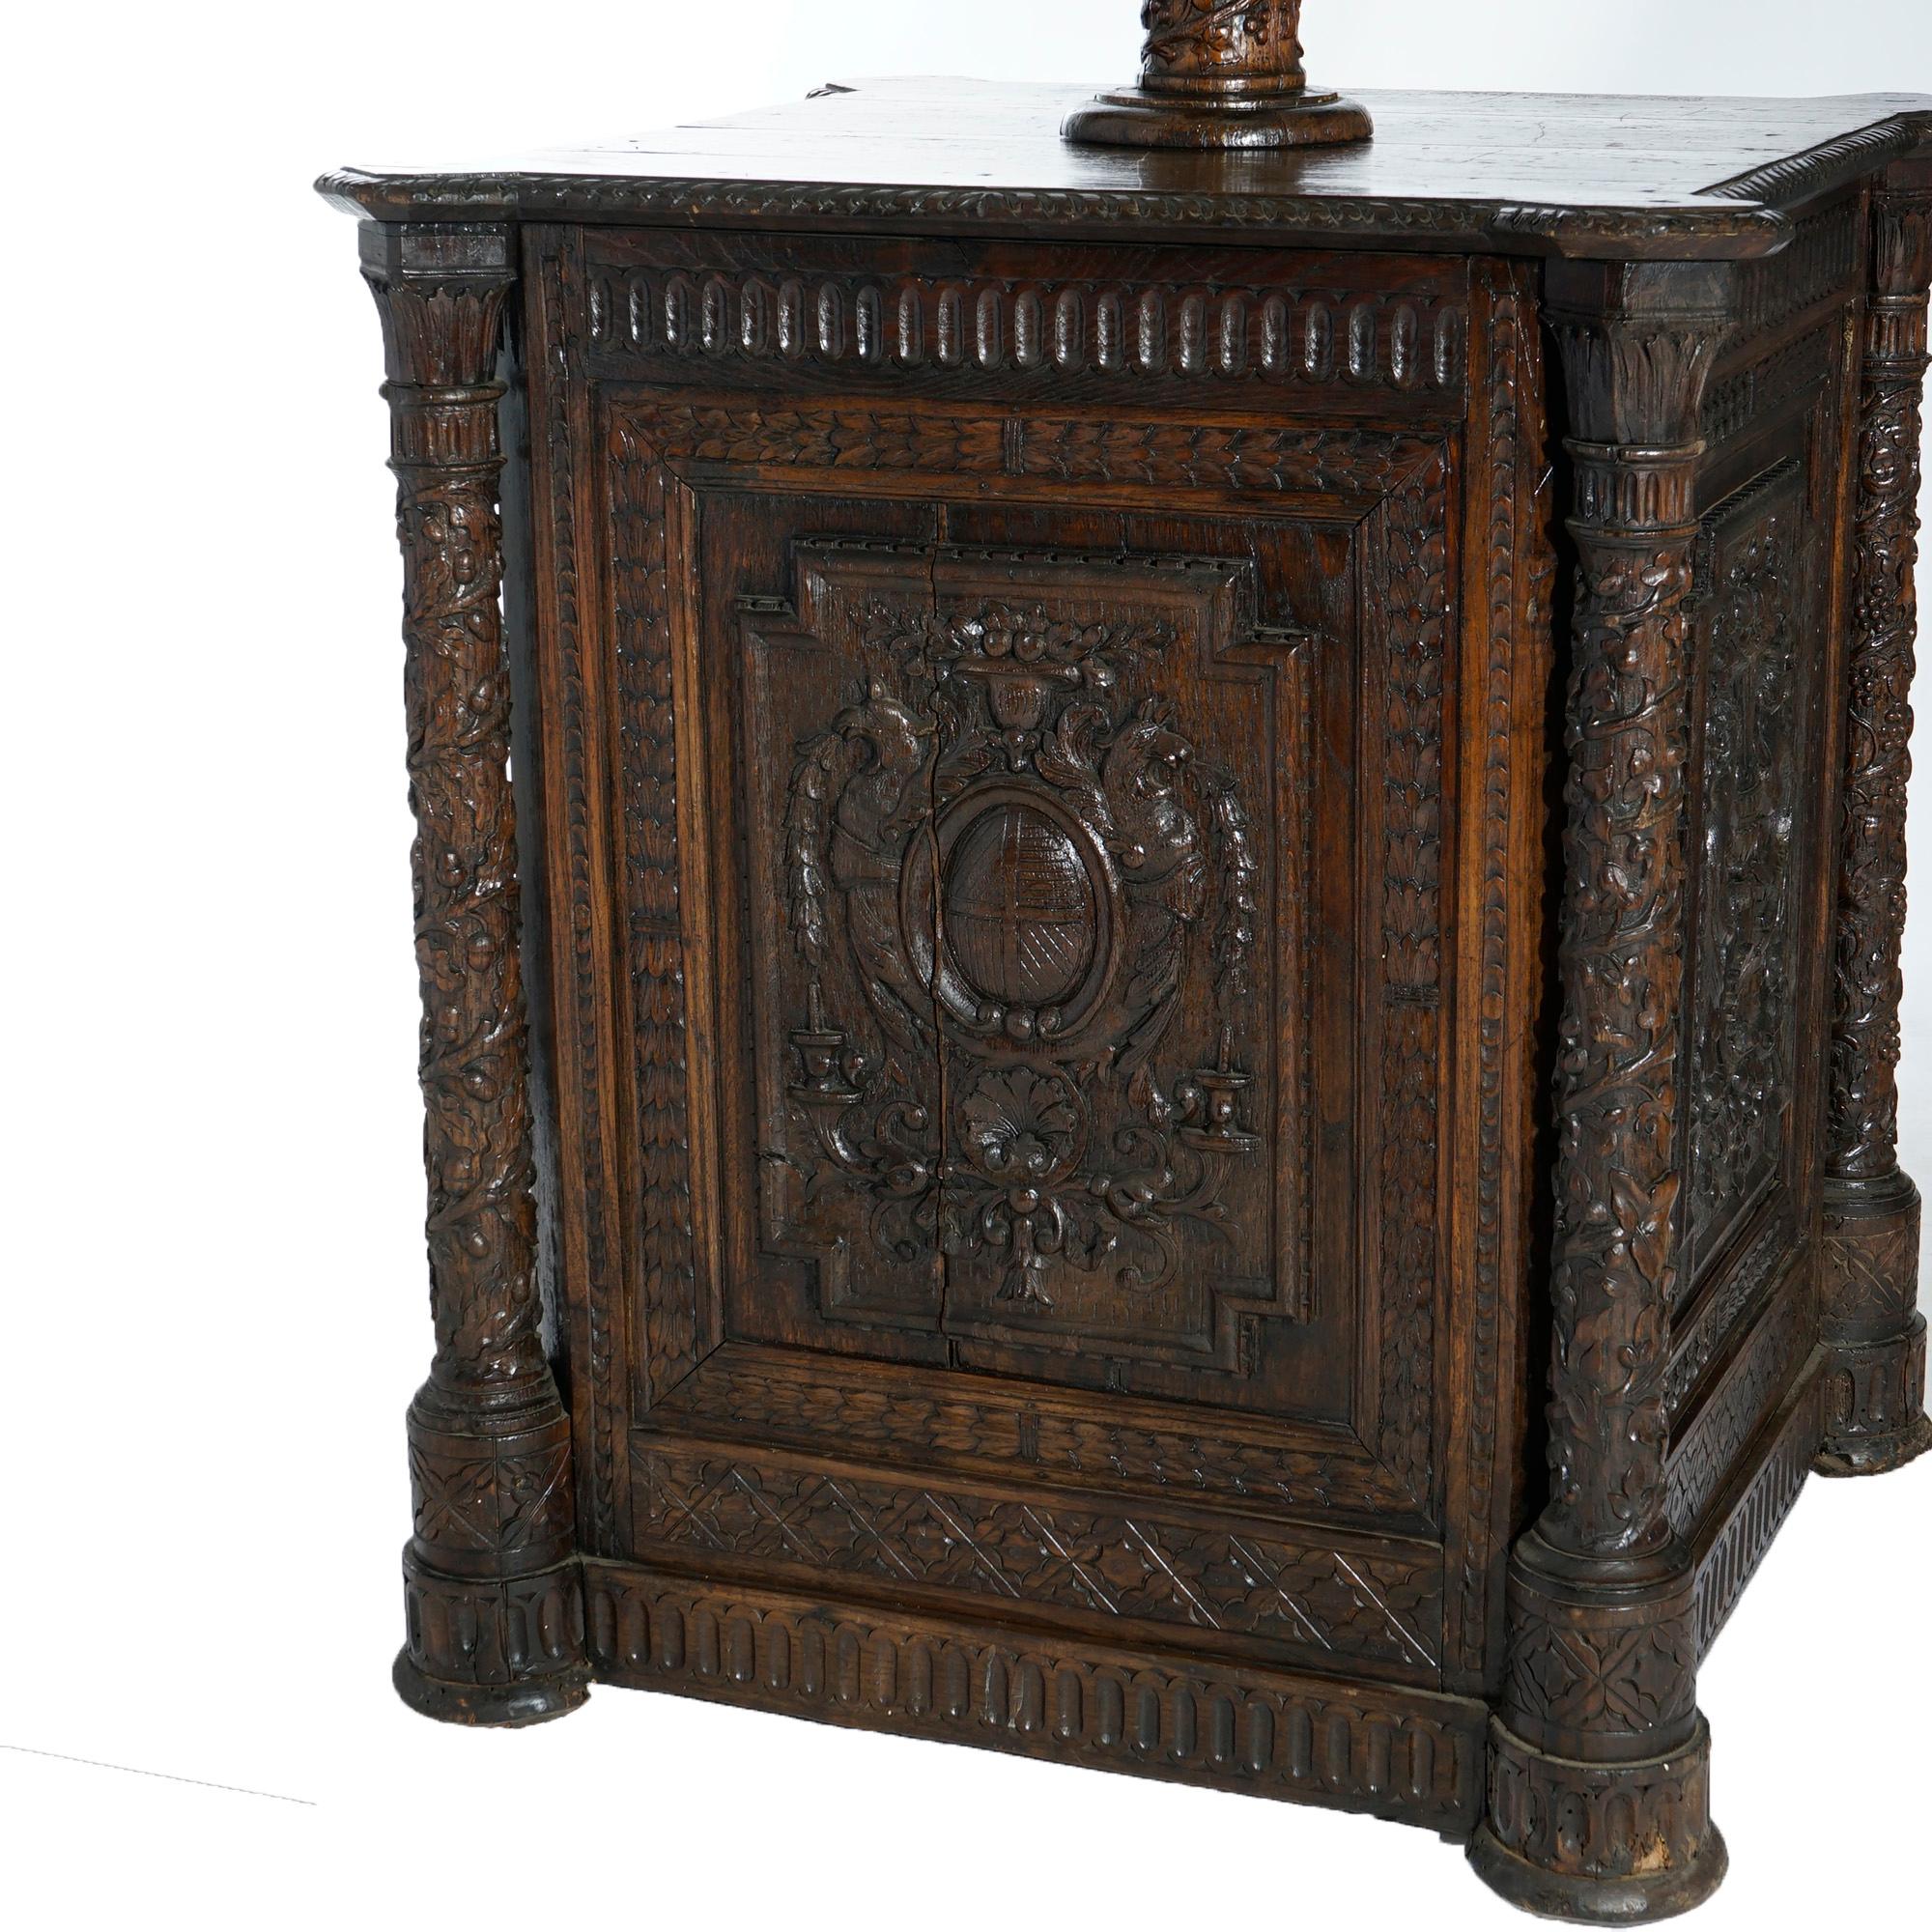 Early Antique Continental Carved Oak Reliquary Cabinet & Carved Columns 18th C For Sale 3